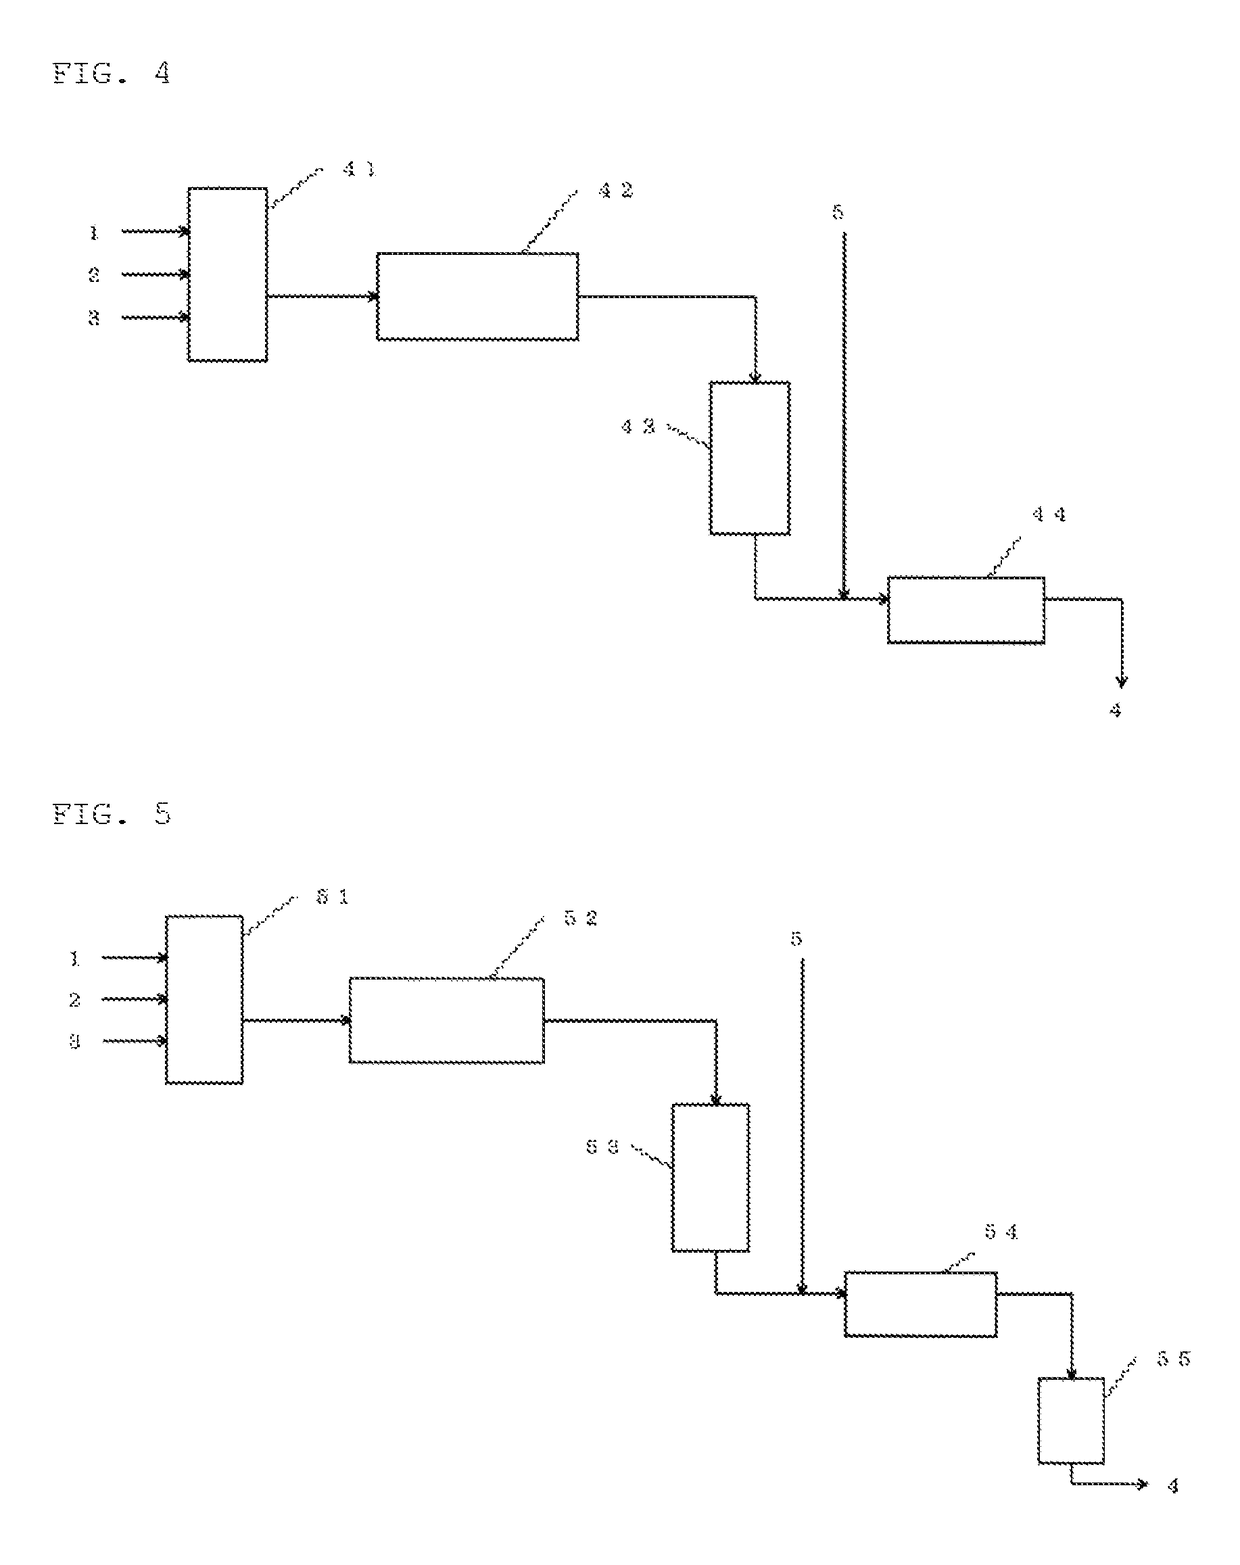 Method for continuously producing ketomalonic acid compound using flow reactor